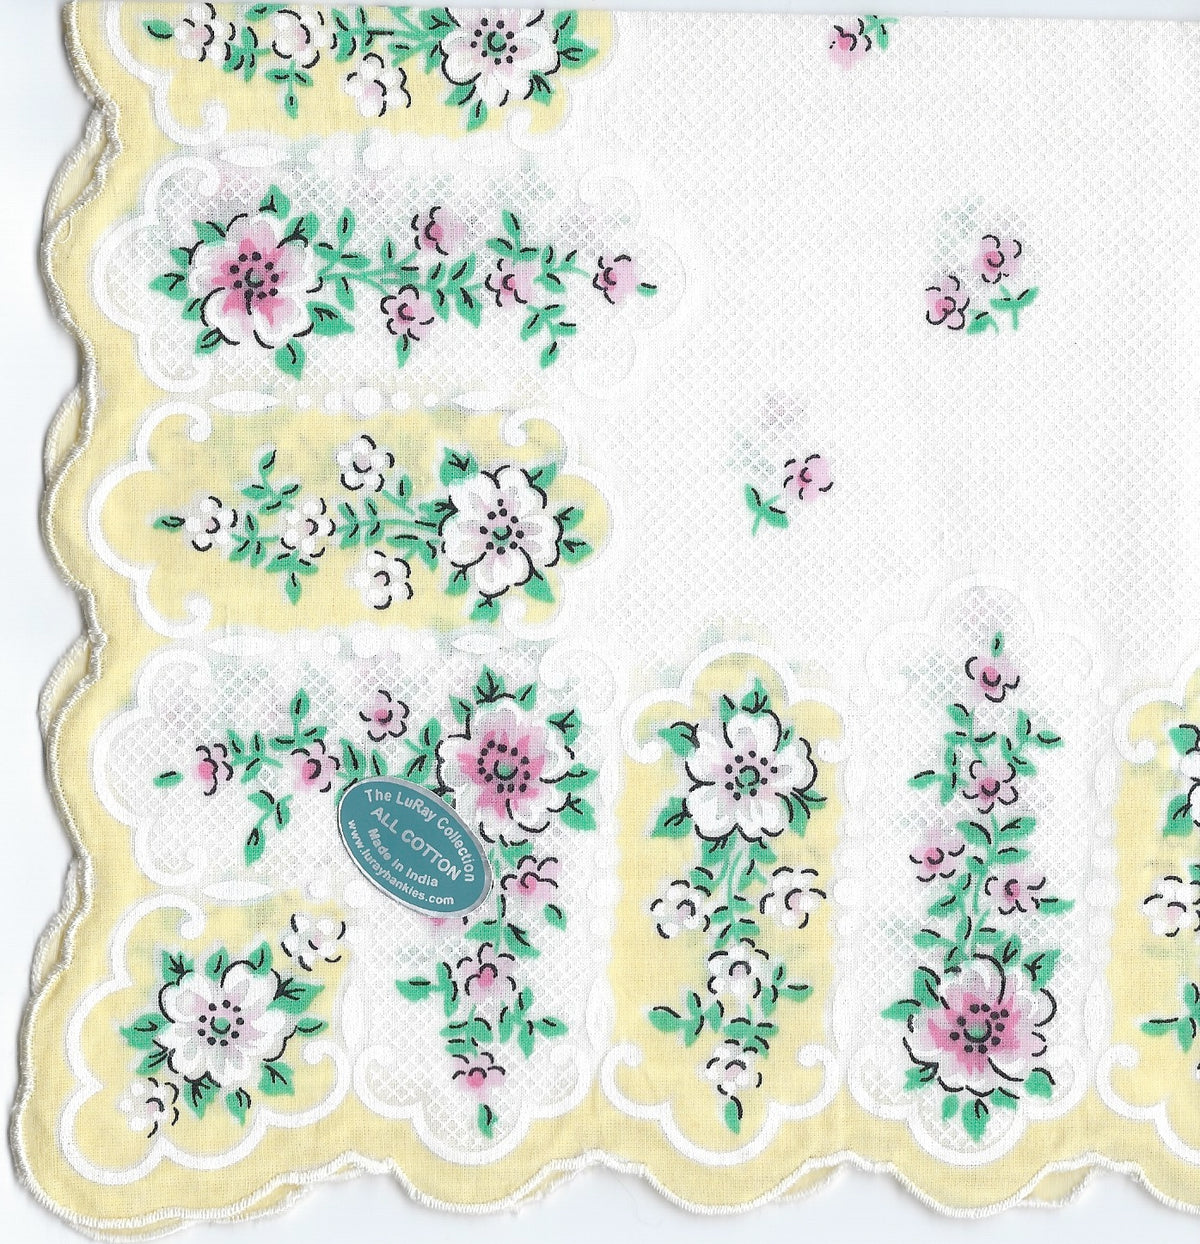 Vintage-Inspired Hanky -White & Yellow Hanky with Pink & White Flowers